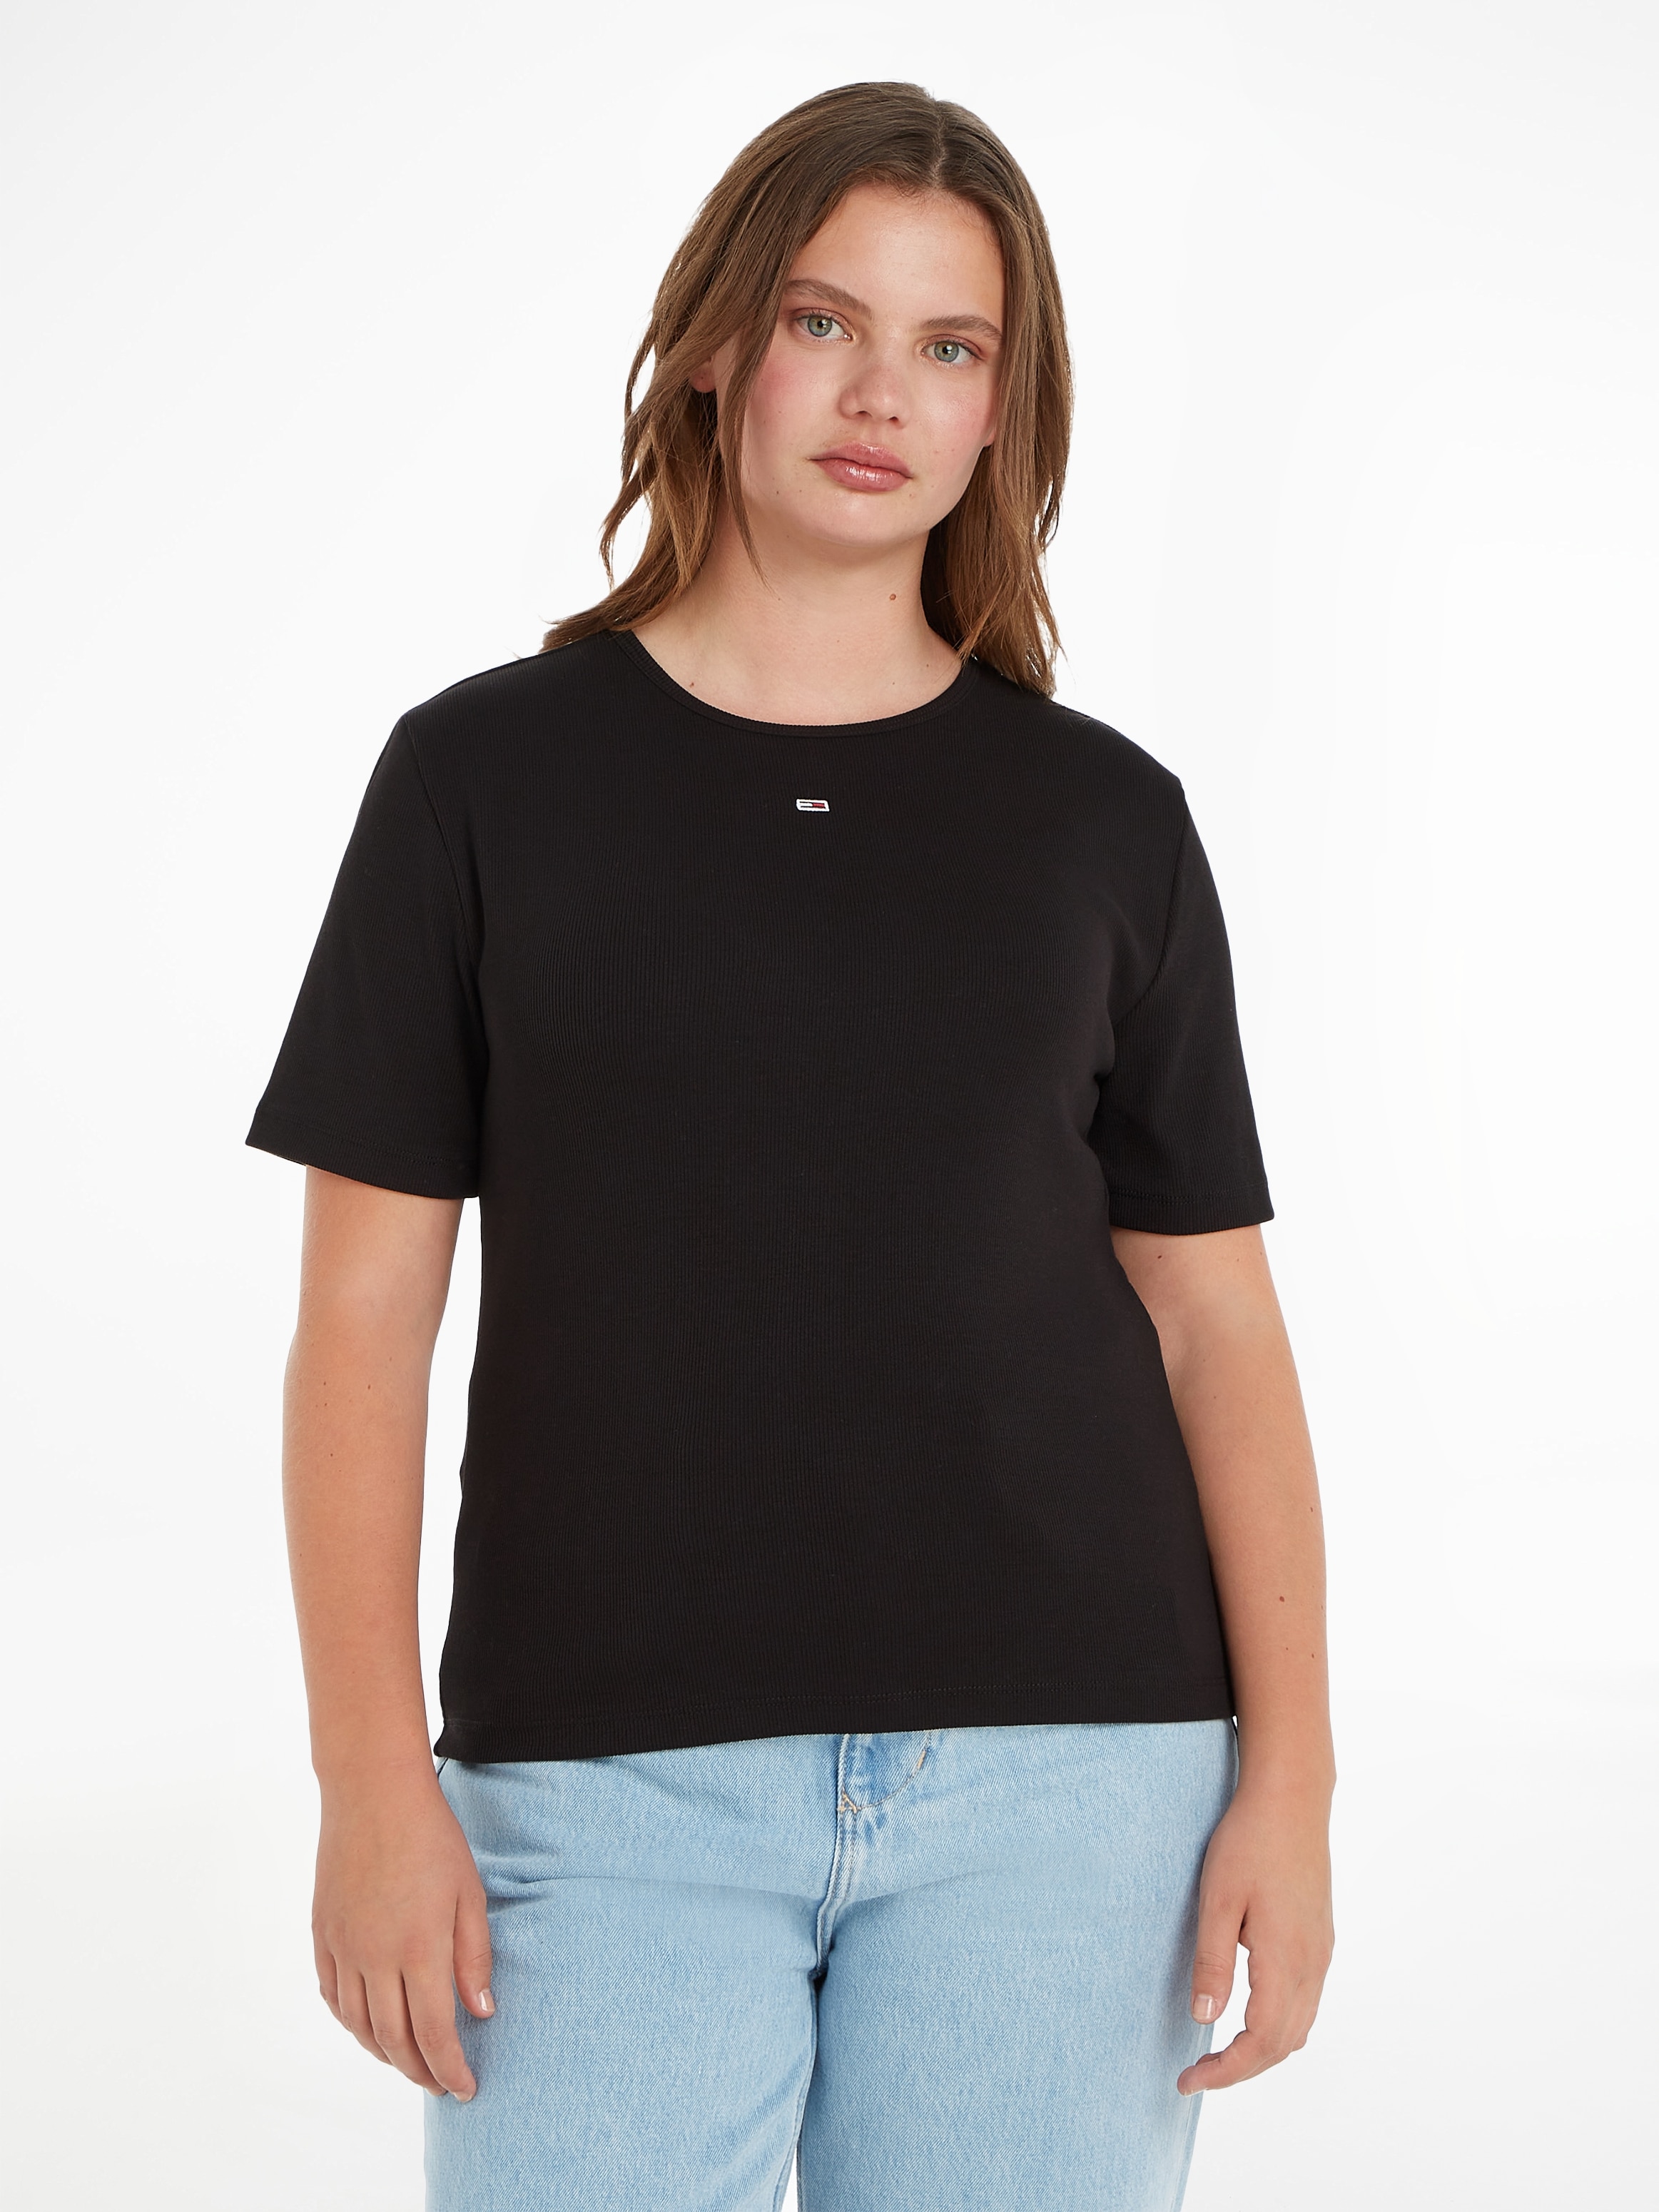 Tommy Jeans OTTOversand bei ESSENTIAL »TJW (1 PLUS SIZE CRV tlg.), Curve Rundhalsshirt Jeans-Logostickerei CURVE,mit Tommy SS«, RIB BBY